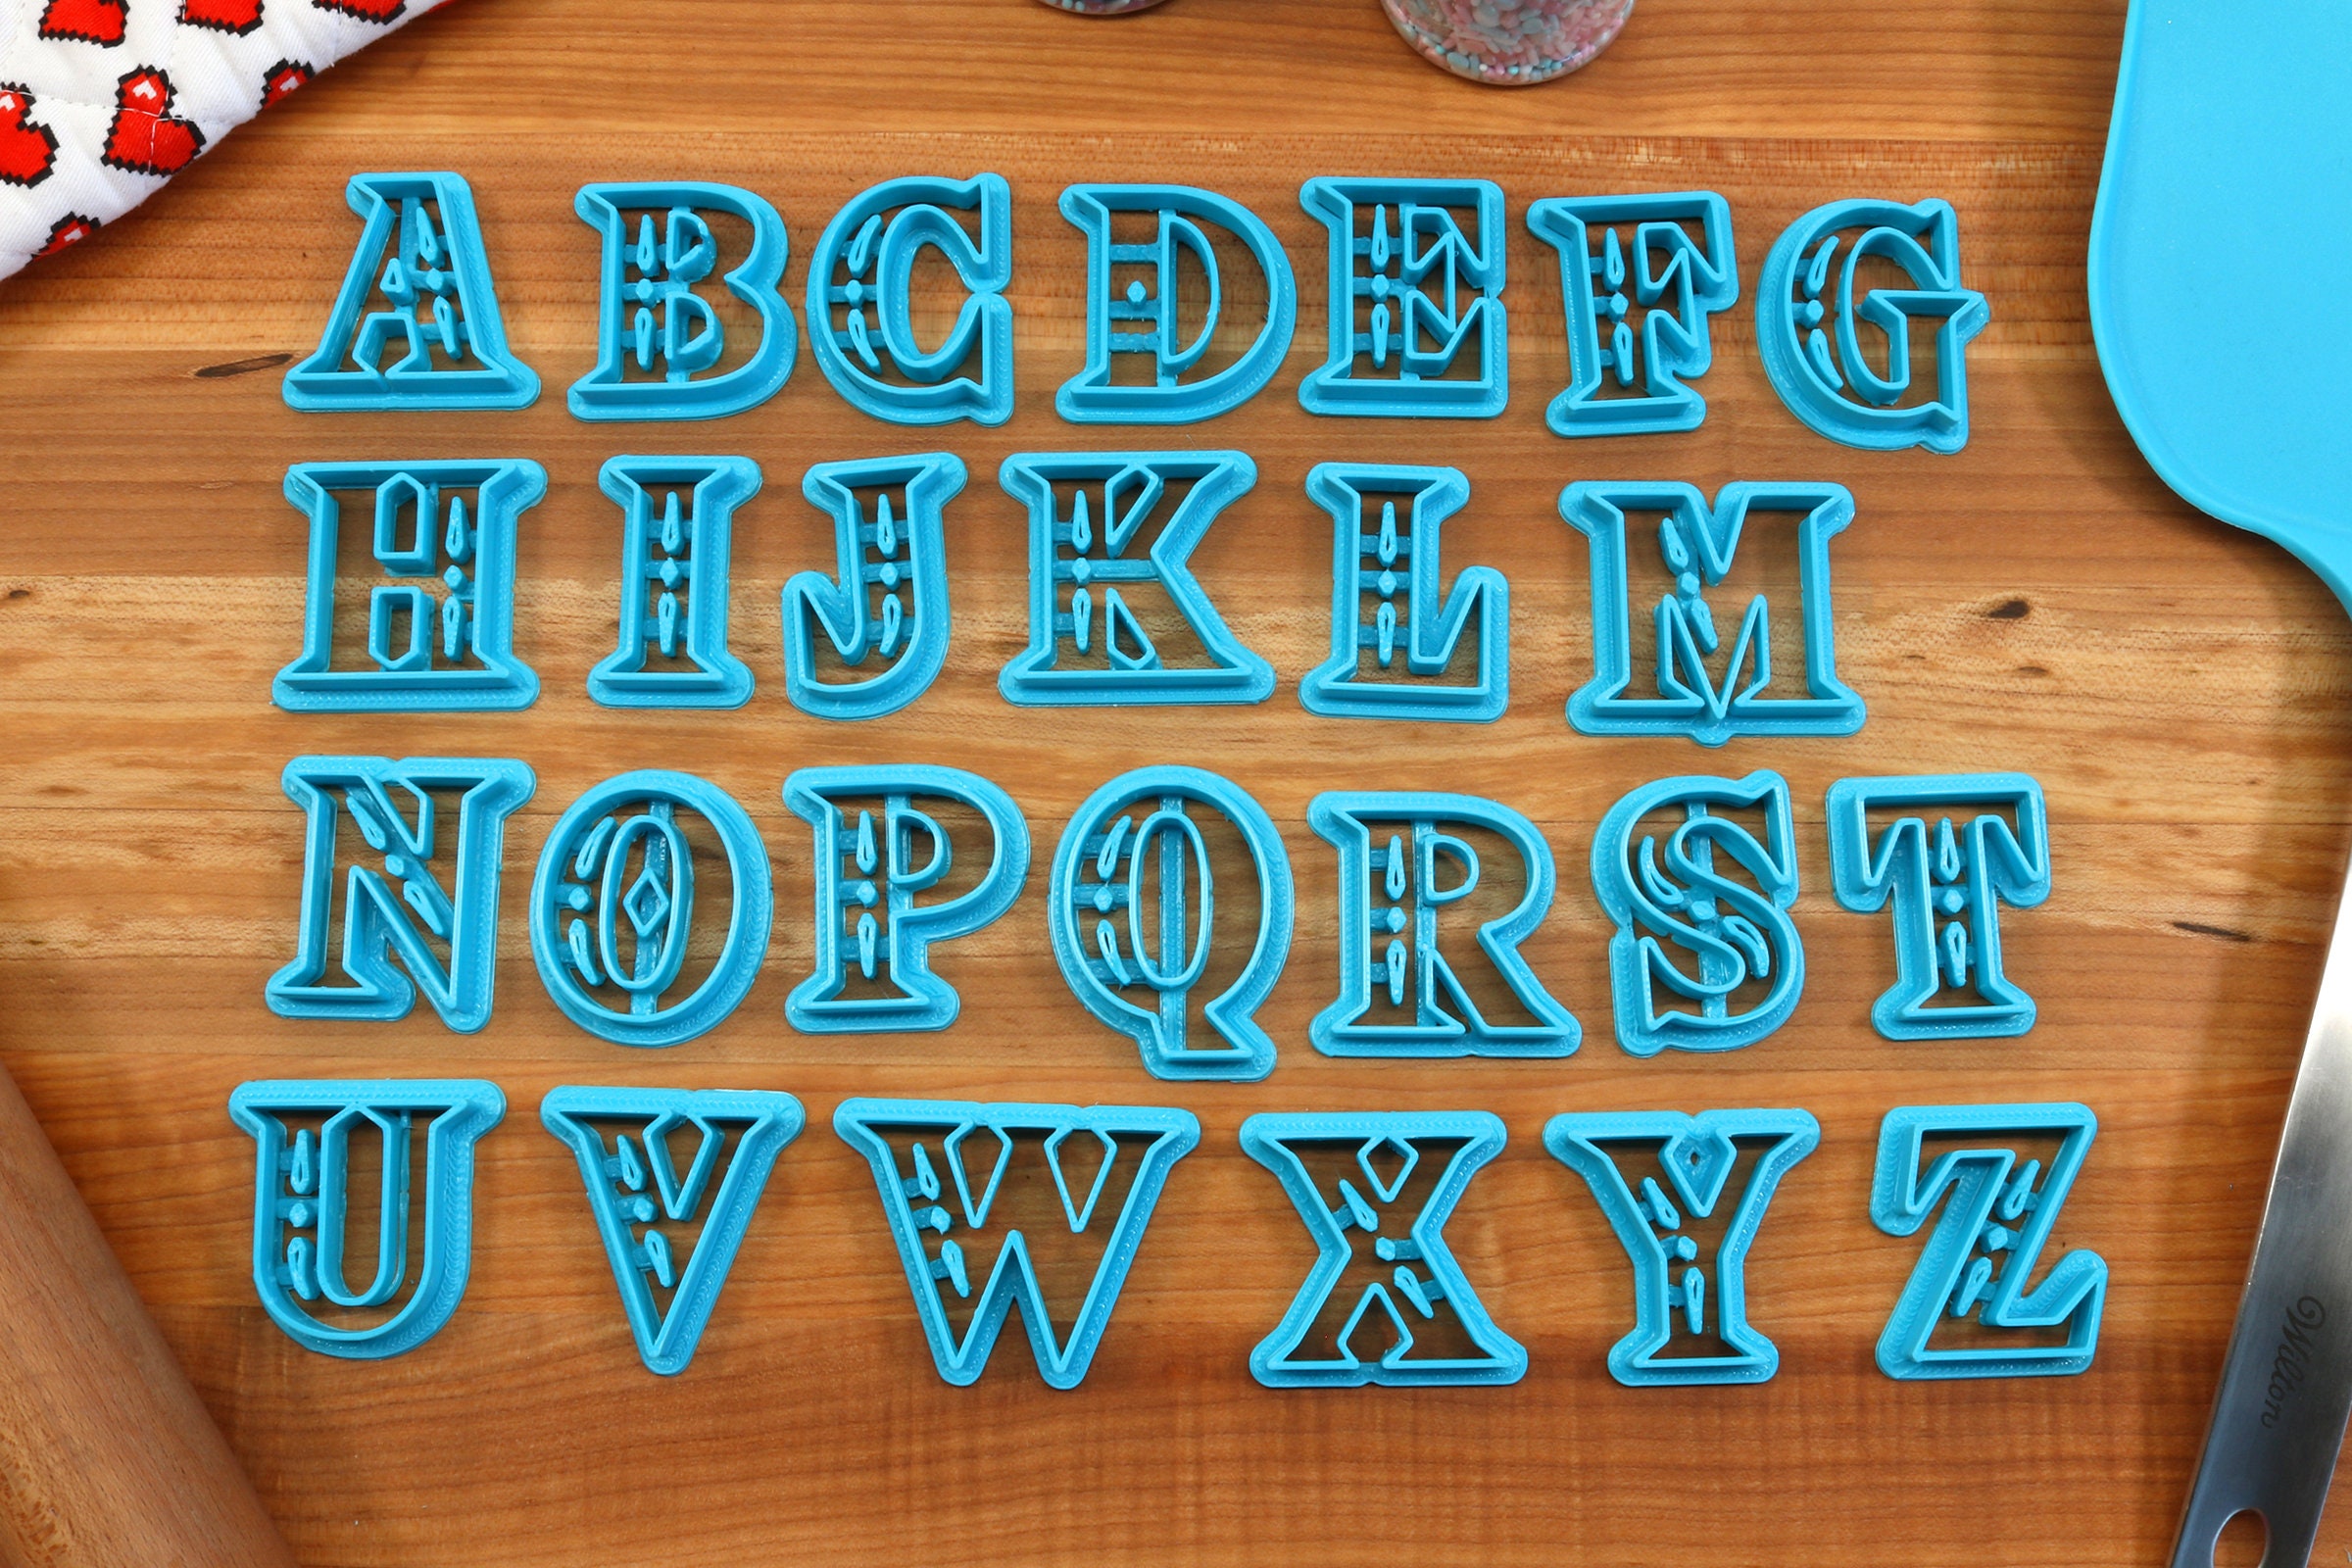 Hyrule FONT Cookie Cutters - Fondant Letters, Letters for Cake decorating